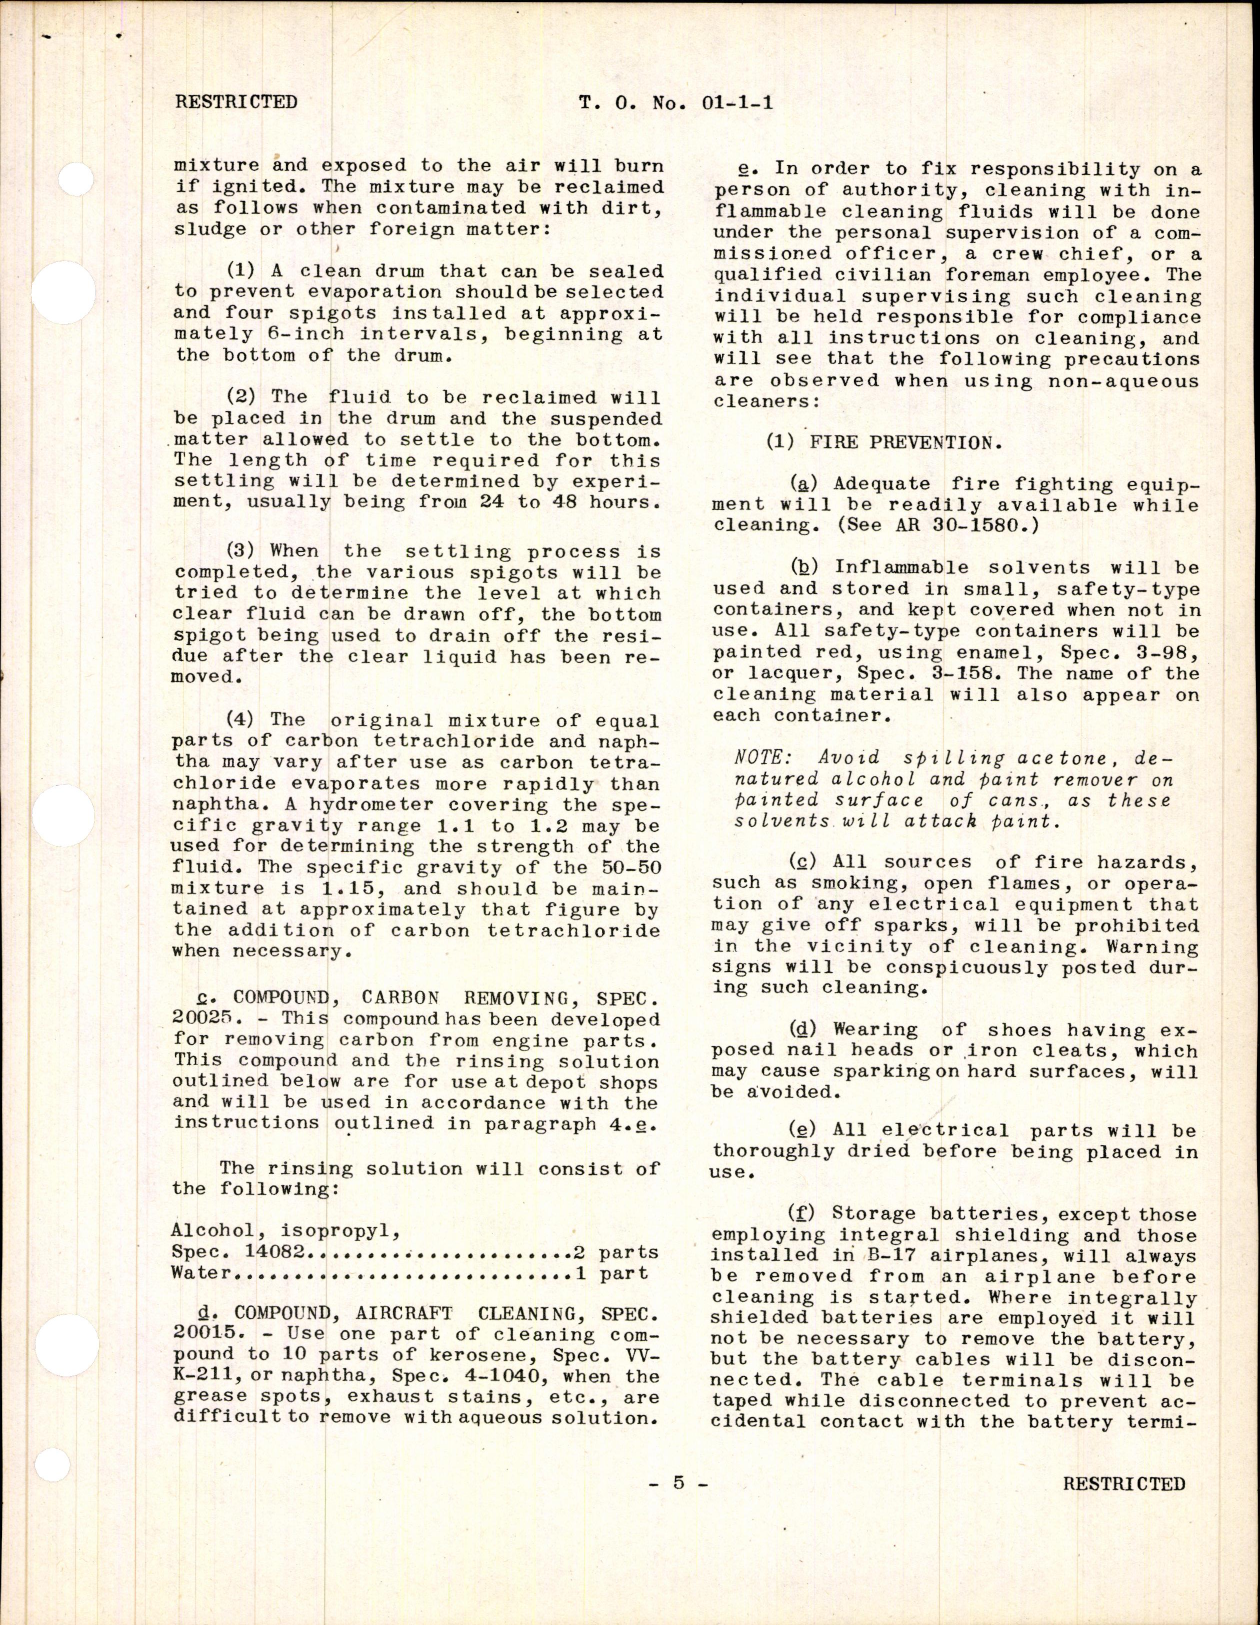 Sample page 5 from AirCorps Library document: Airplanes and Maintenance Parts; Cleaning of Aeronautical Equipment